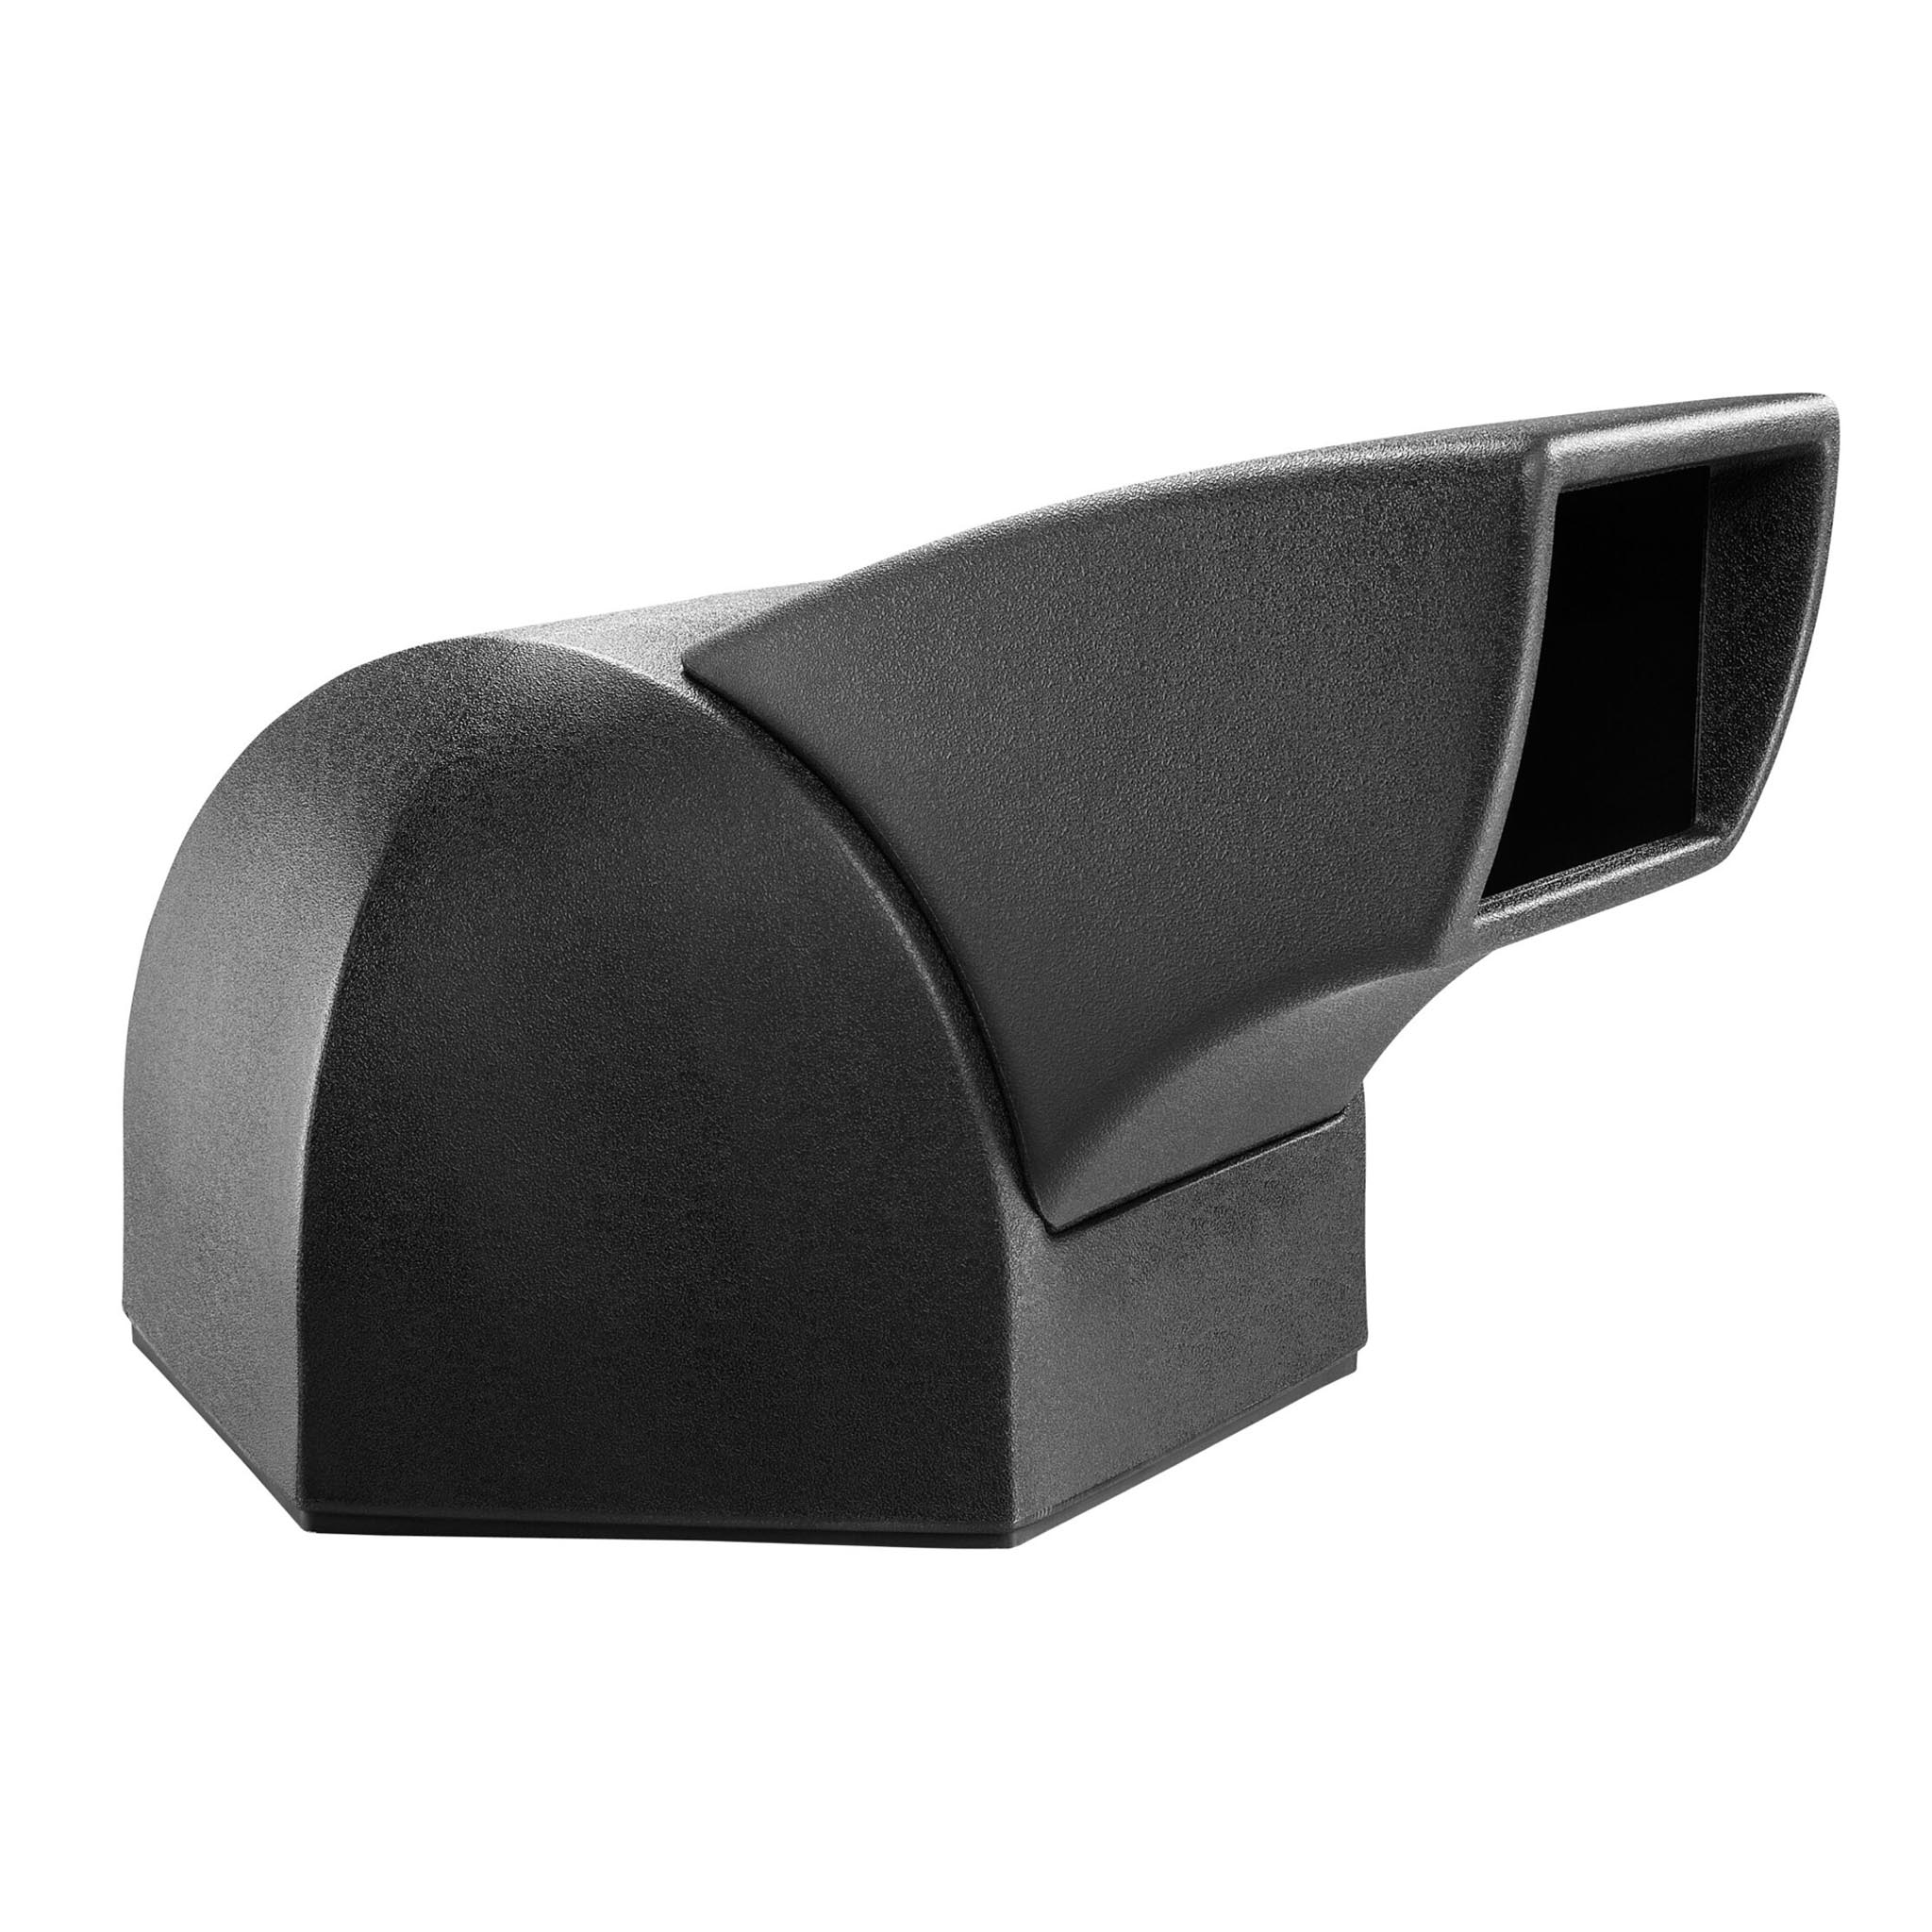 http://www.commercialzone.com/wp-content/uploads/2021/02/737401PolyTec-Series-Replacement-Hex-Drive-Thru-Dome-Lid-Black-Studio-Image-scaled-1.jpg